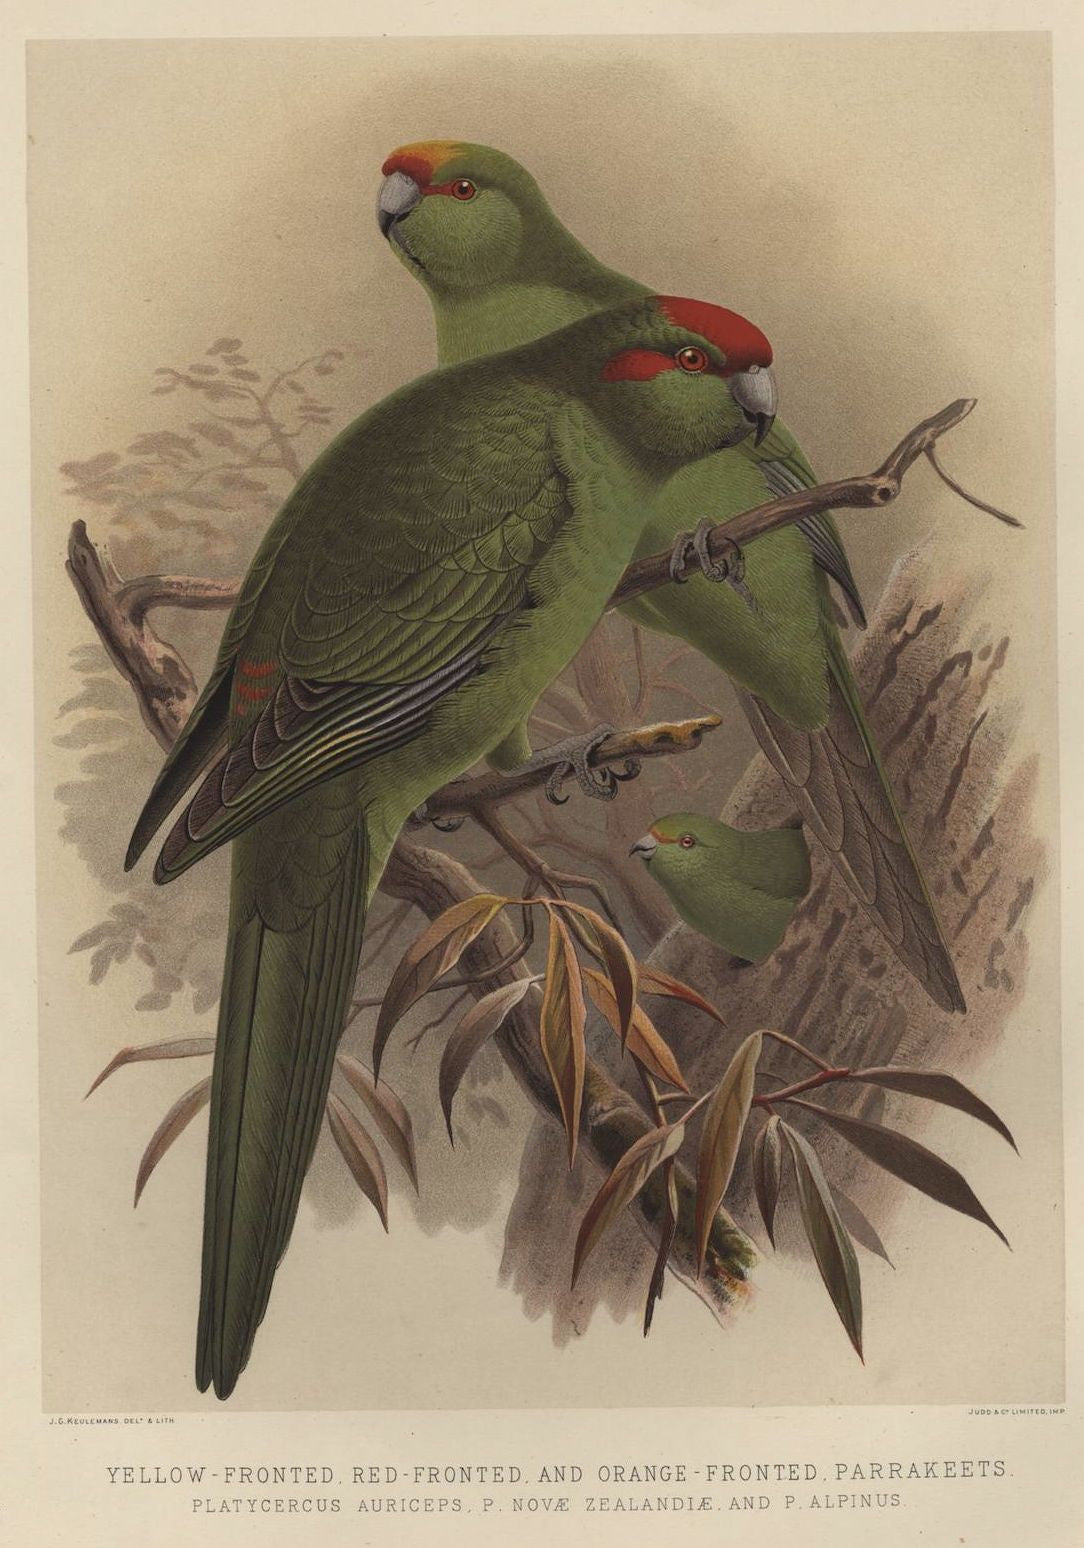 Yellow-fronted, Red-fronted and Orange-fronted Parrakeets